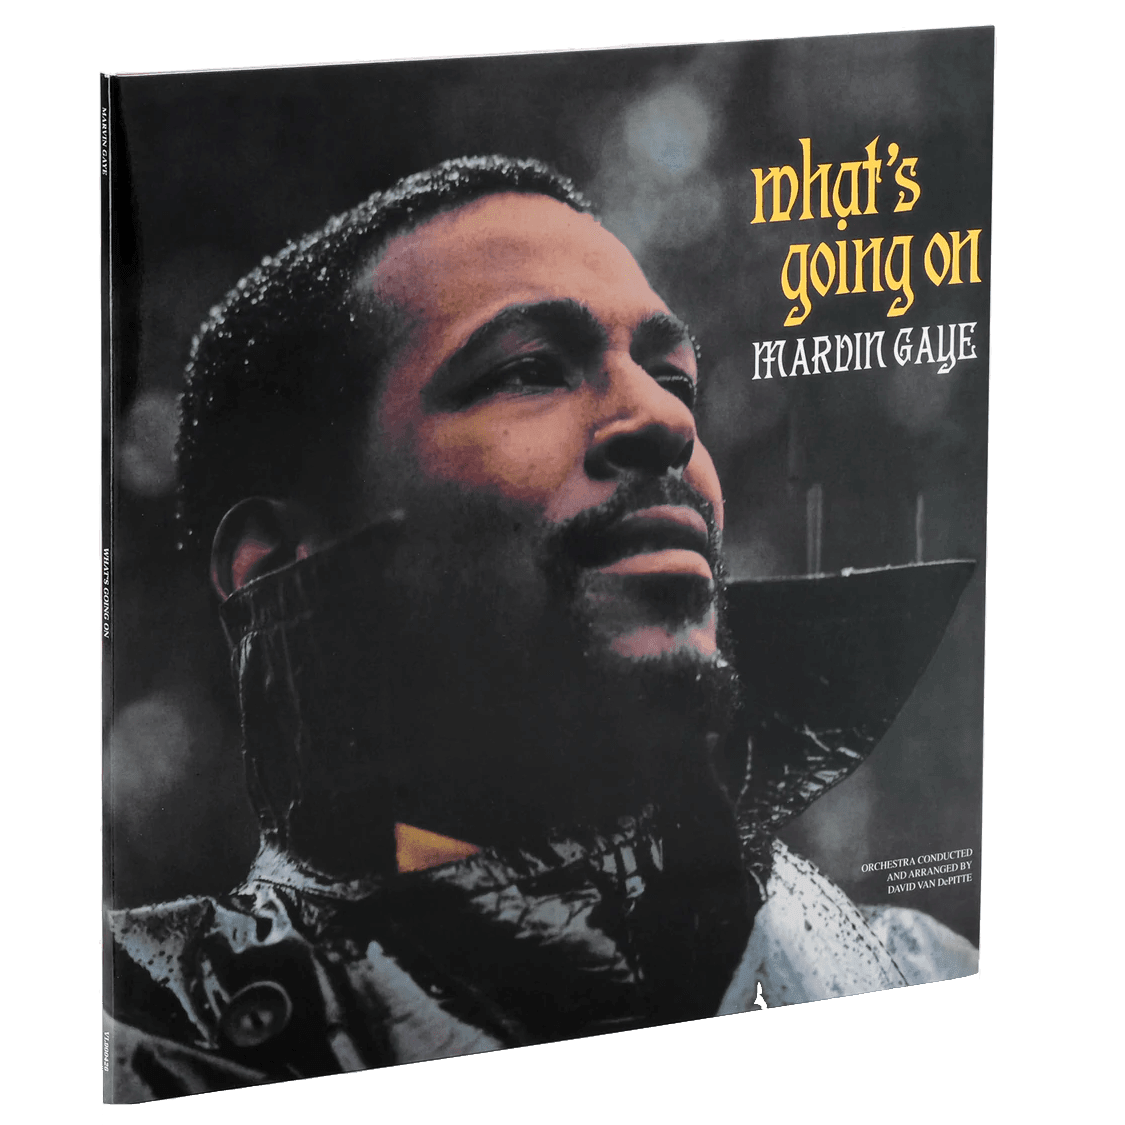 Marvin Gaye - What's Going On (Limited Edition Import, Gatefold, Remastered, 180 Gram, Swamp Green Vinyl) (LP) - Joco Records